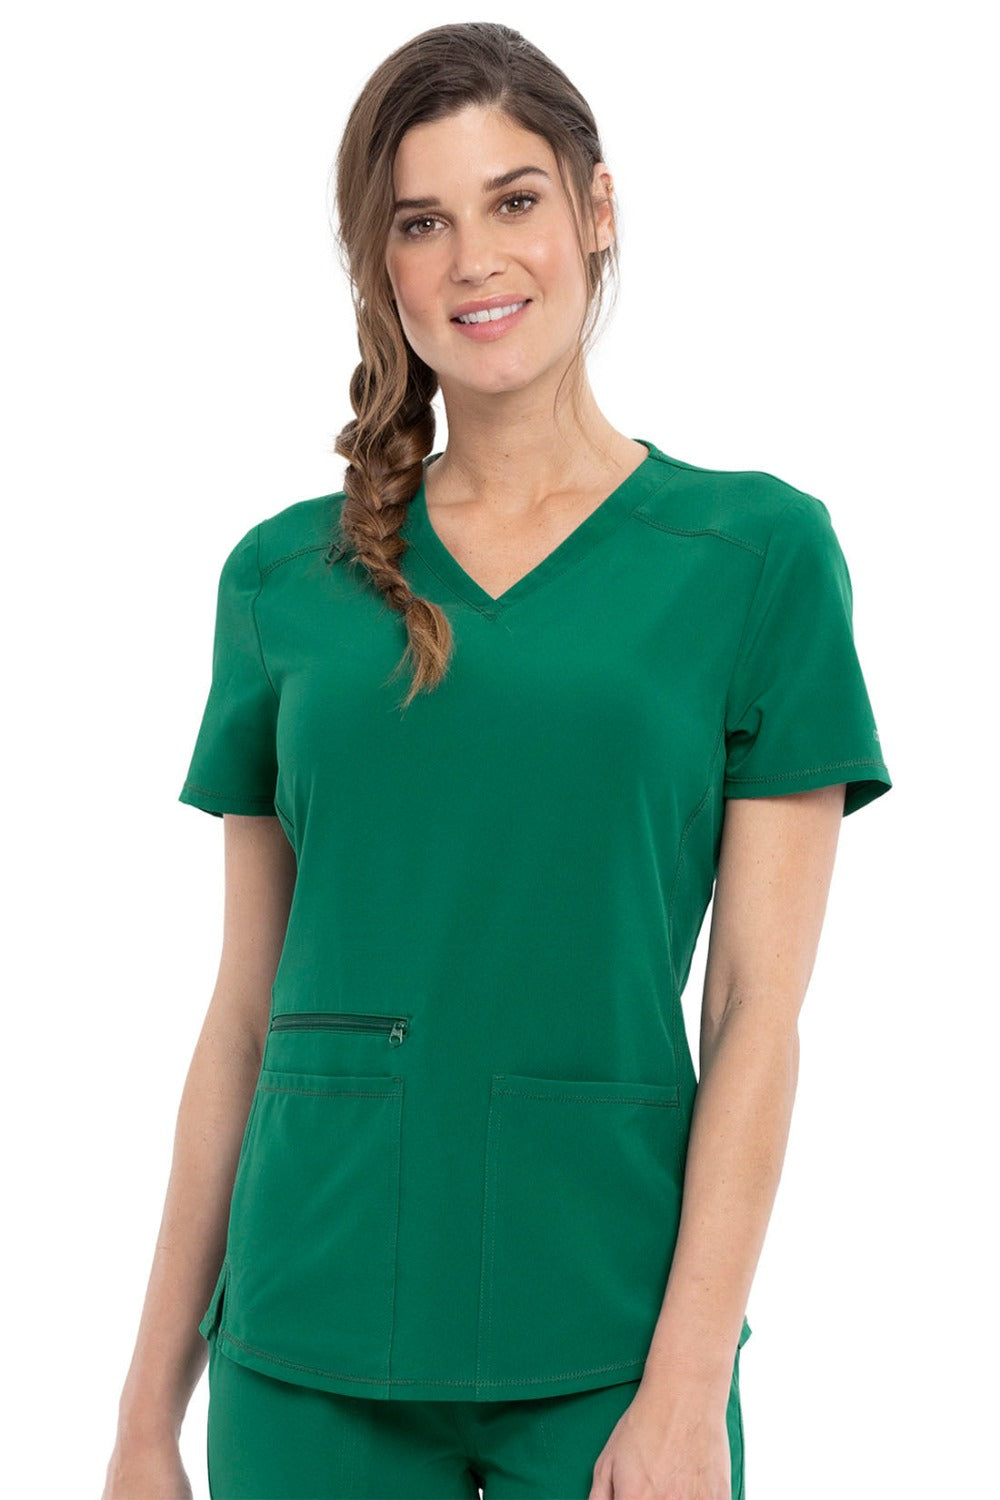 Cherokee Allura V-Neck Scrub Top in Hunter at Parker's Clothing and Shoes.